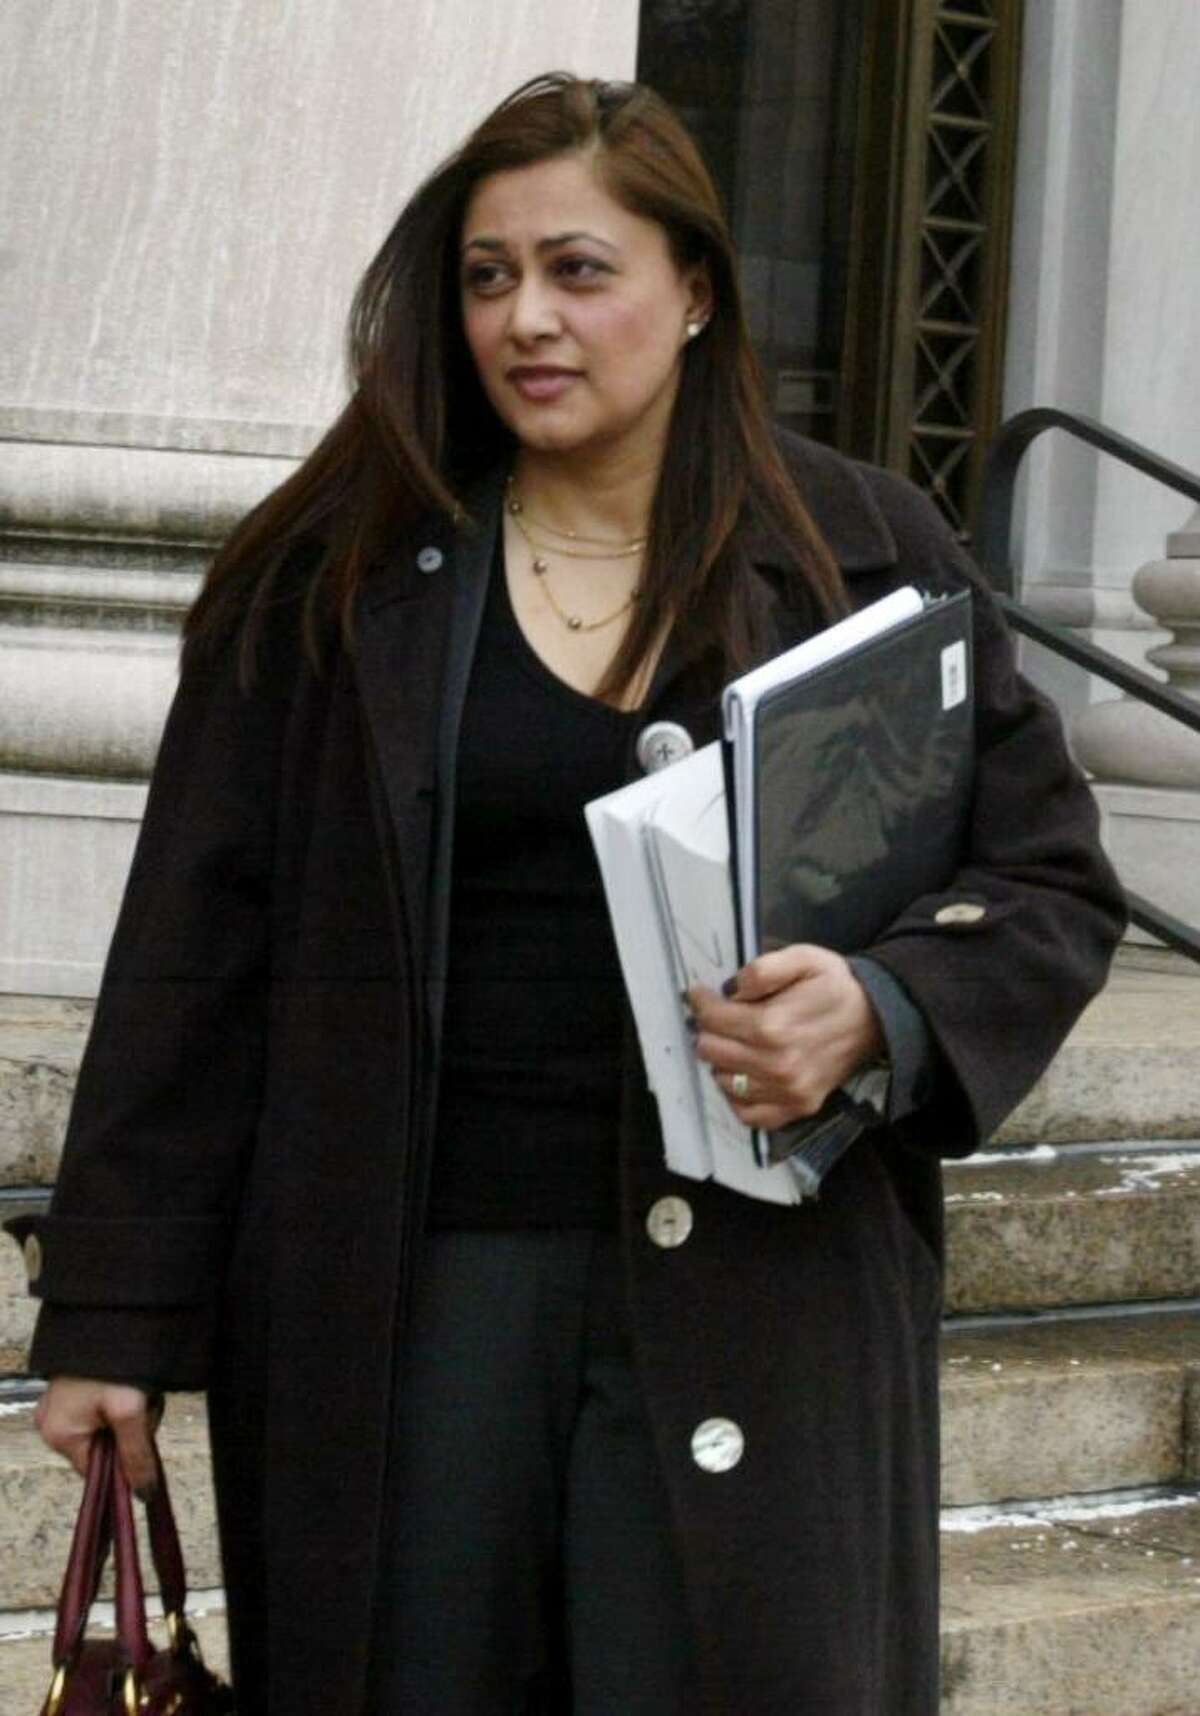 Assistant U.S. Attorney Krishna Patel, leaving the Federal Courthouse in New Haven on Feb. 2, 2010. Patel has developed an expertise in sexploitation cases.